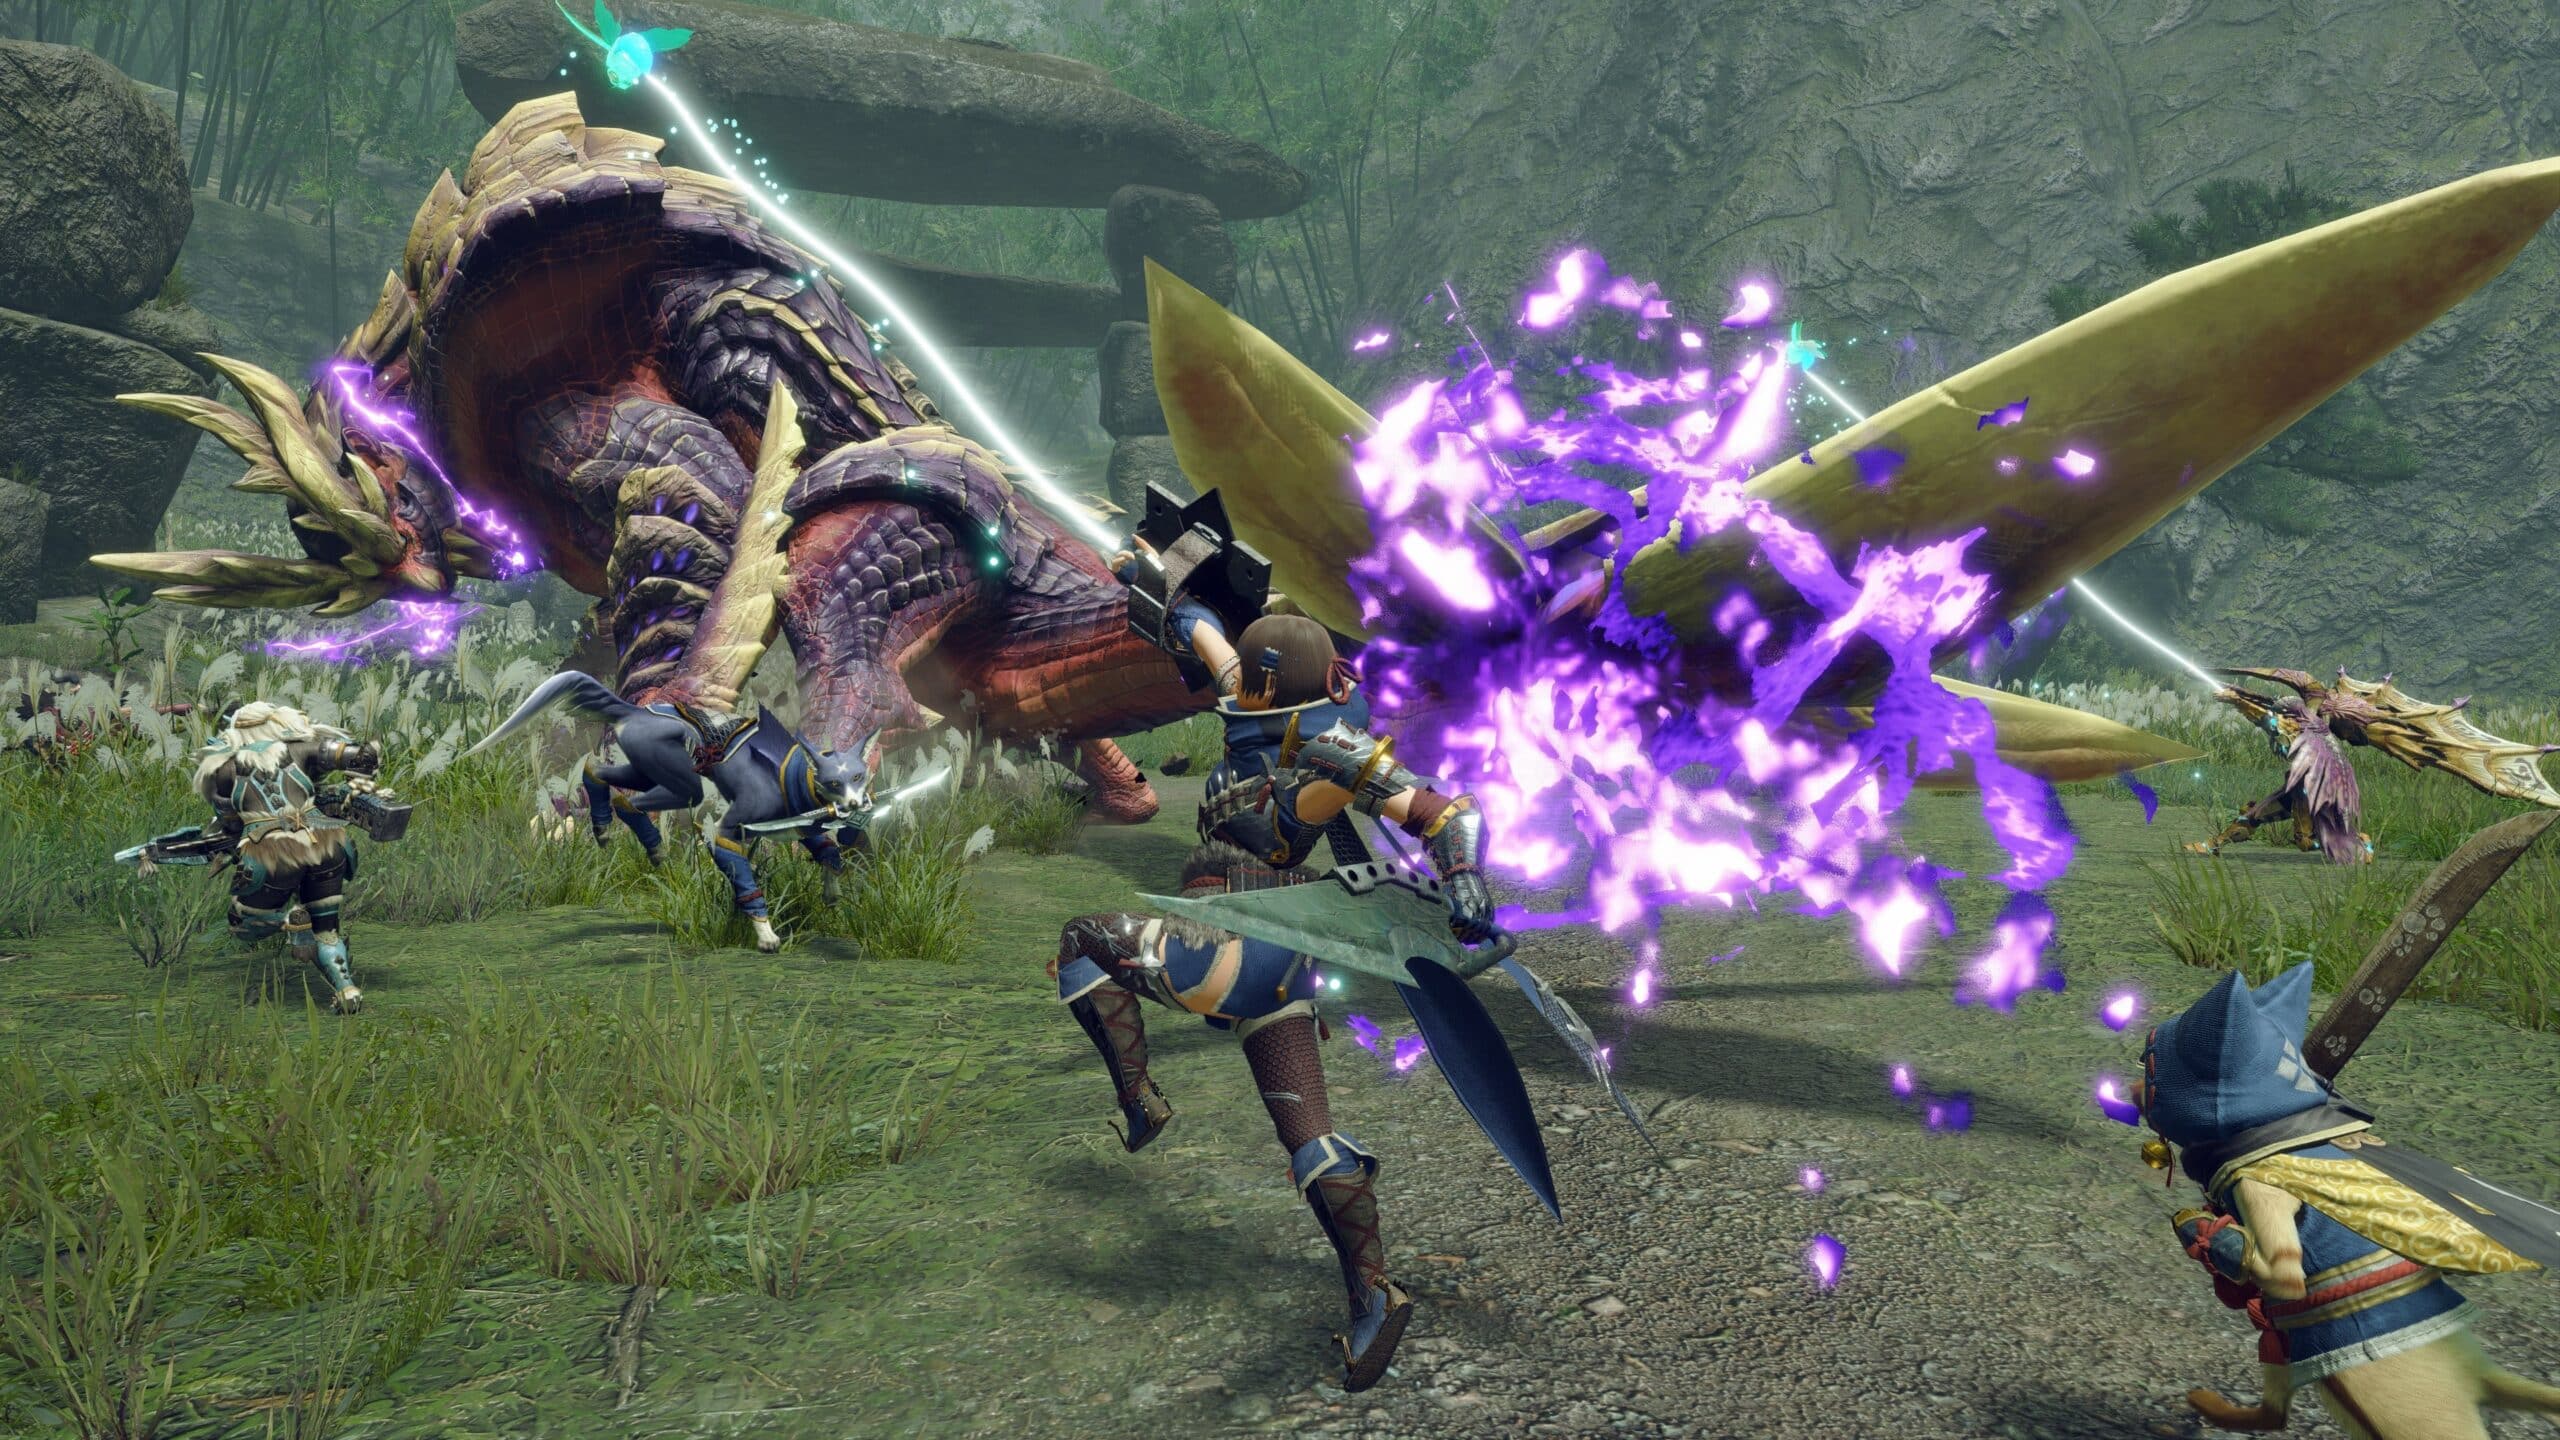 Monster Hunter-like Wild Hearts gameplay shows seven minutes of action